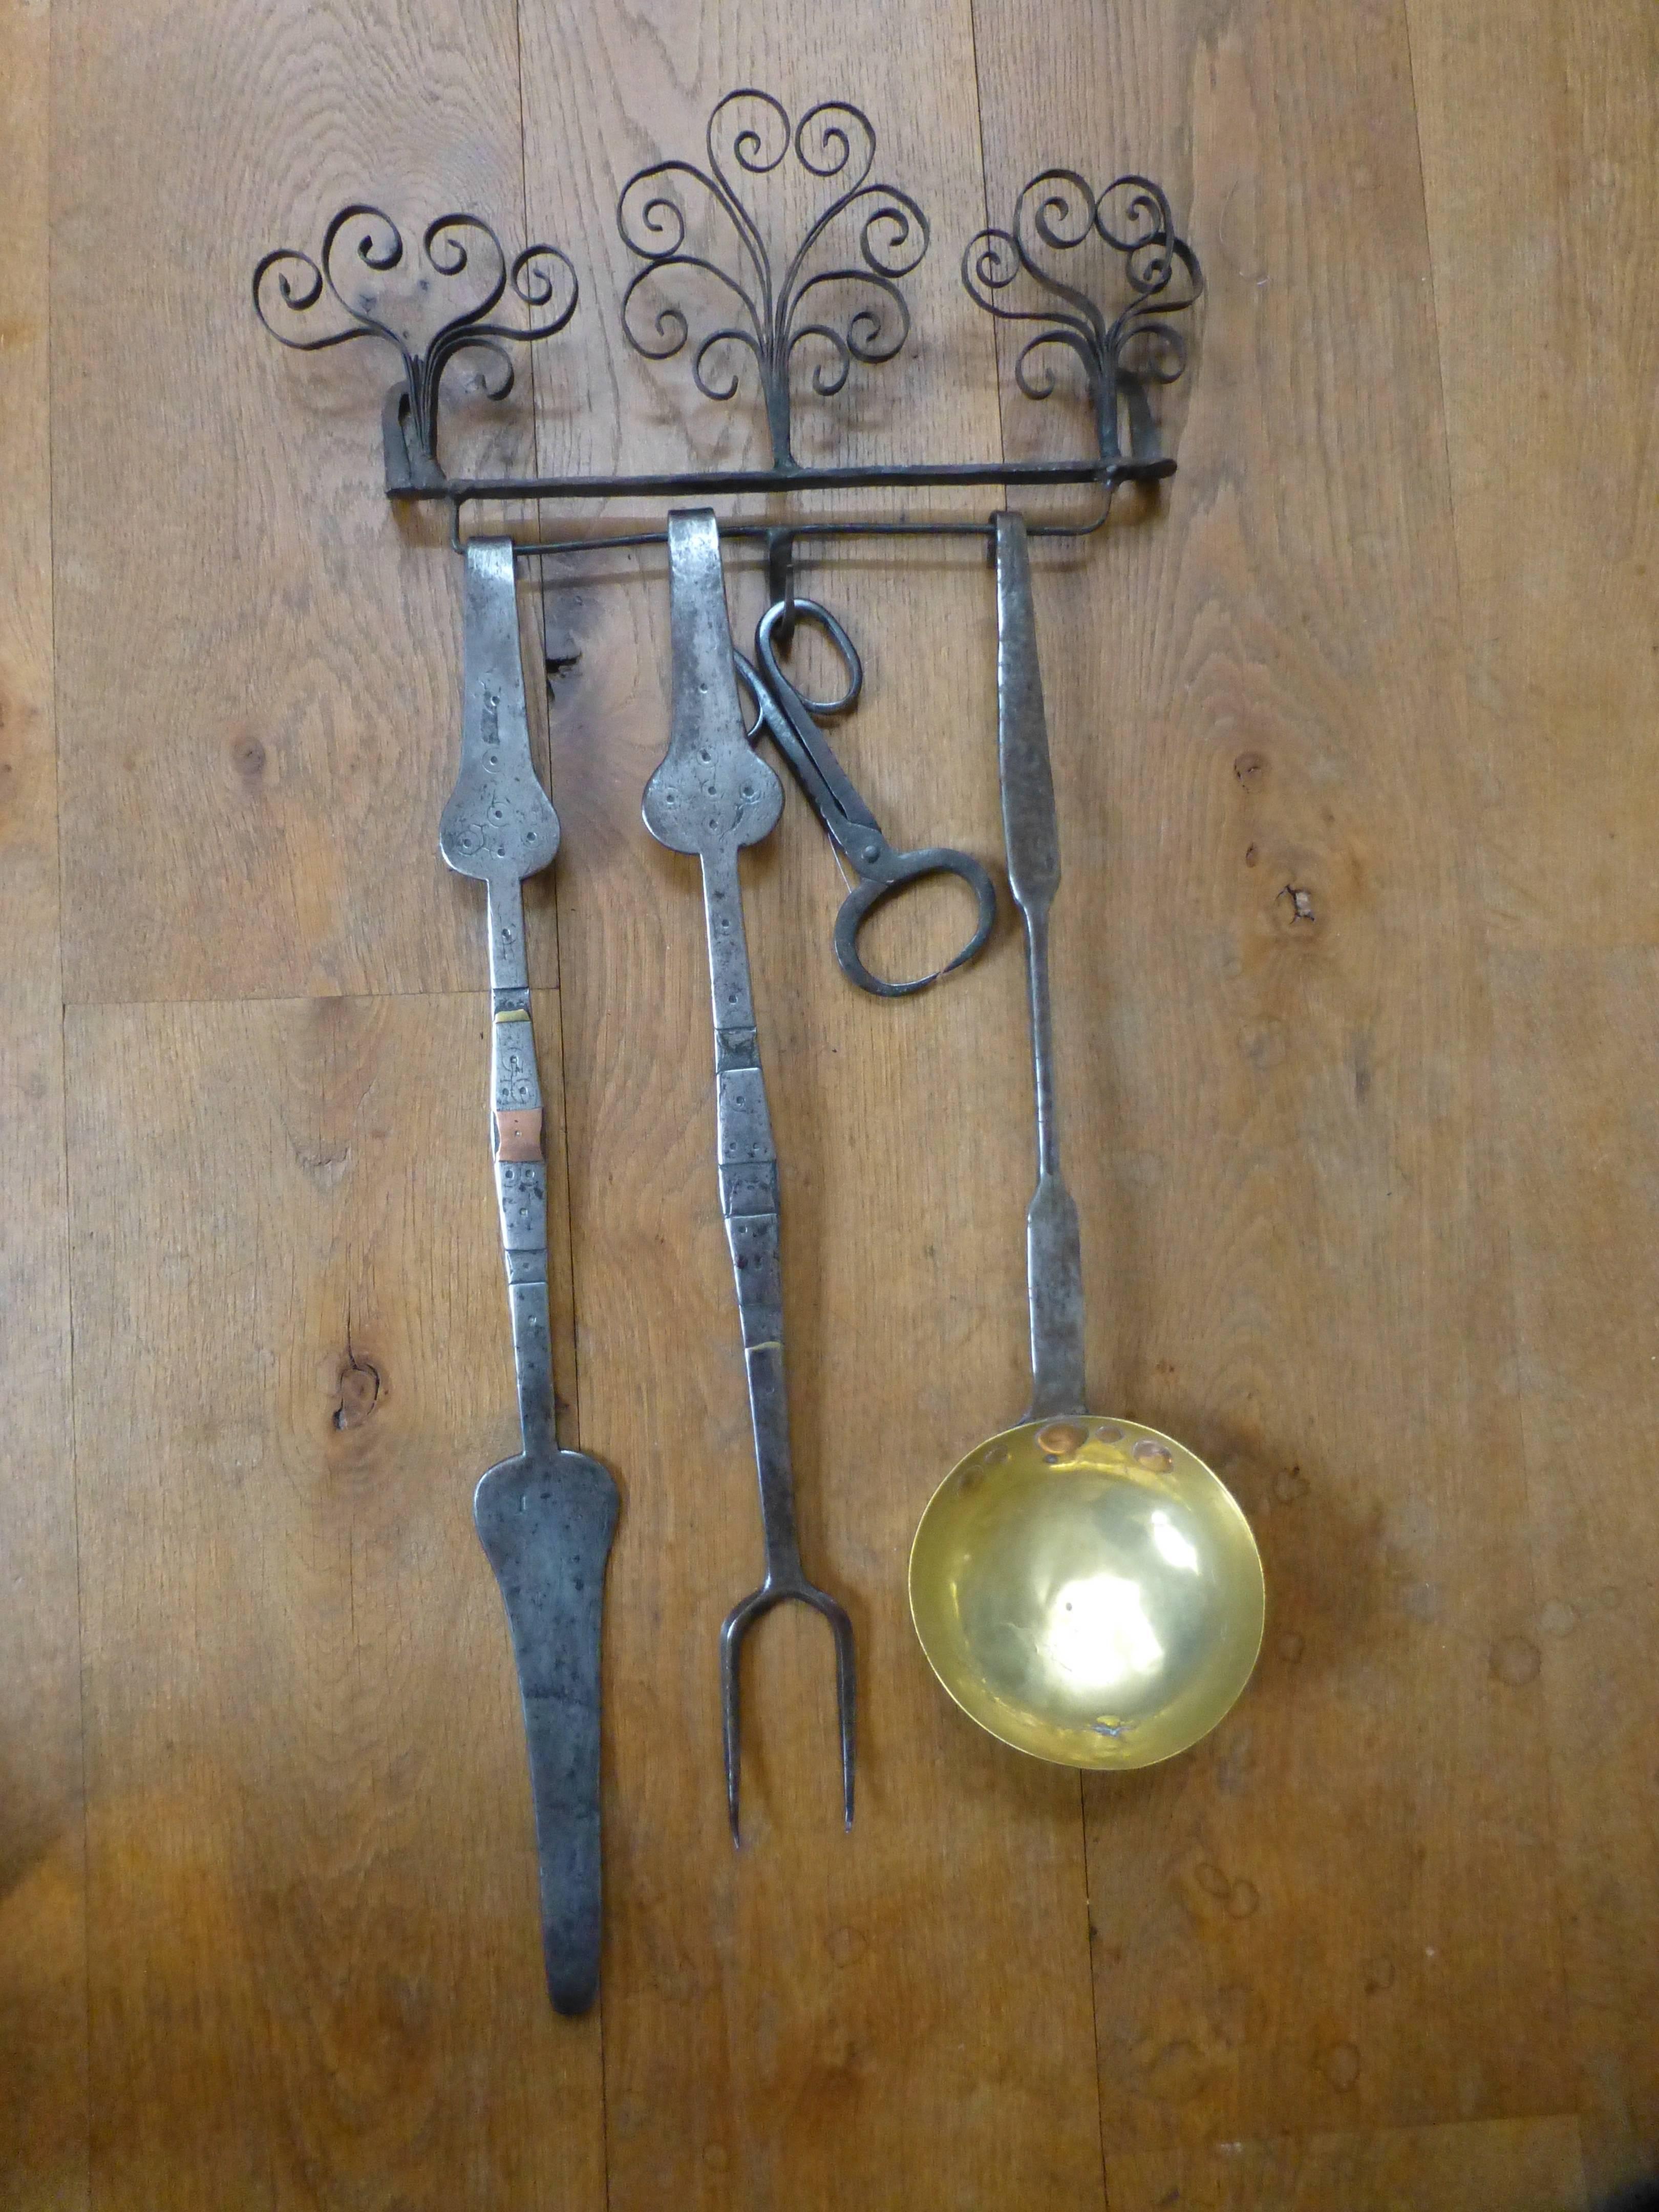 Rare set of 17th century fireplace tools used for cooking in an open fire. The tongs were used to pick up rock candy (sugar). The set and hanger are made of wrought iron and brass with copper and brass inlaid details. The tools have various